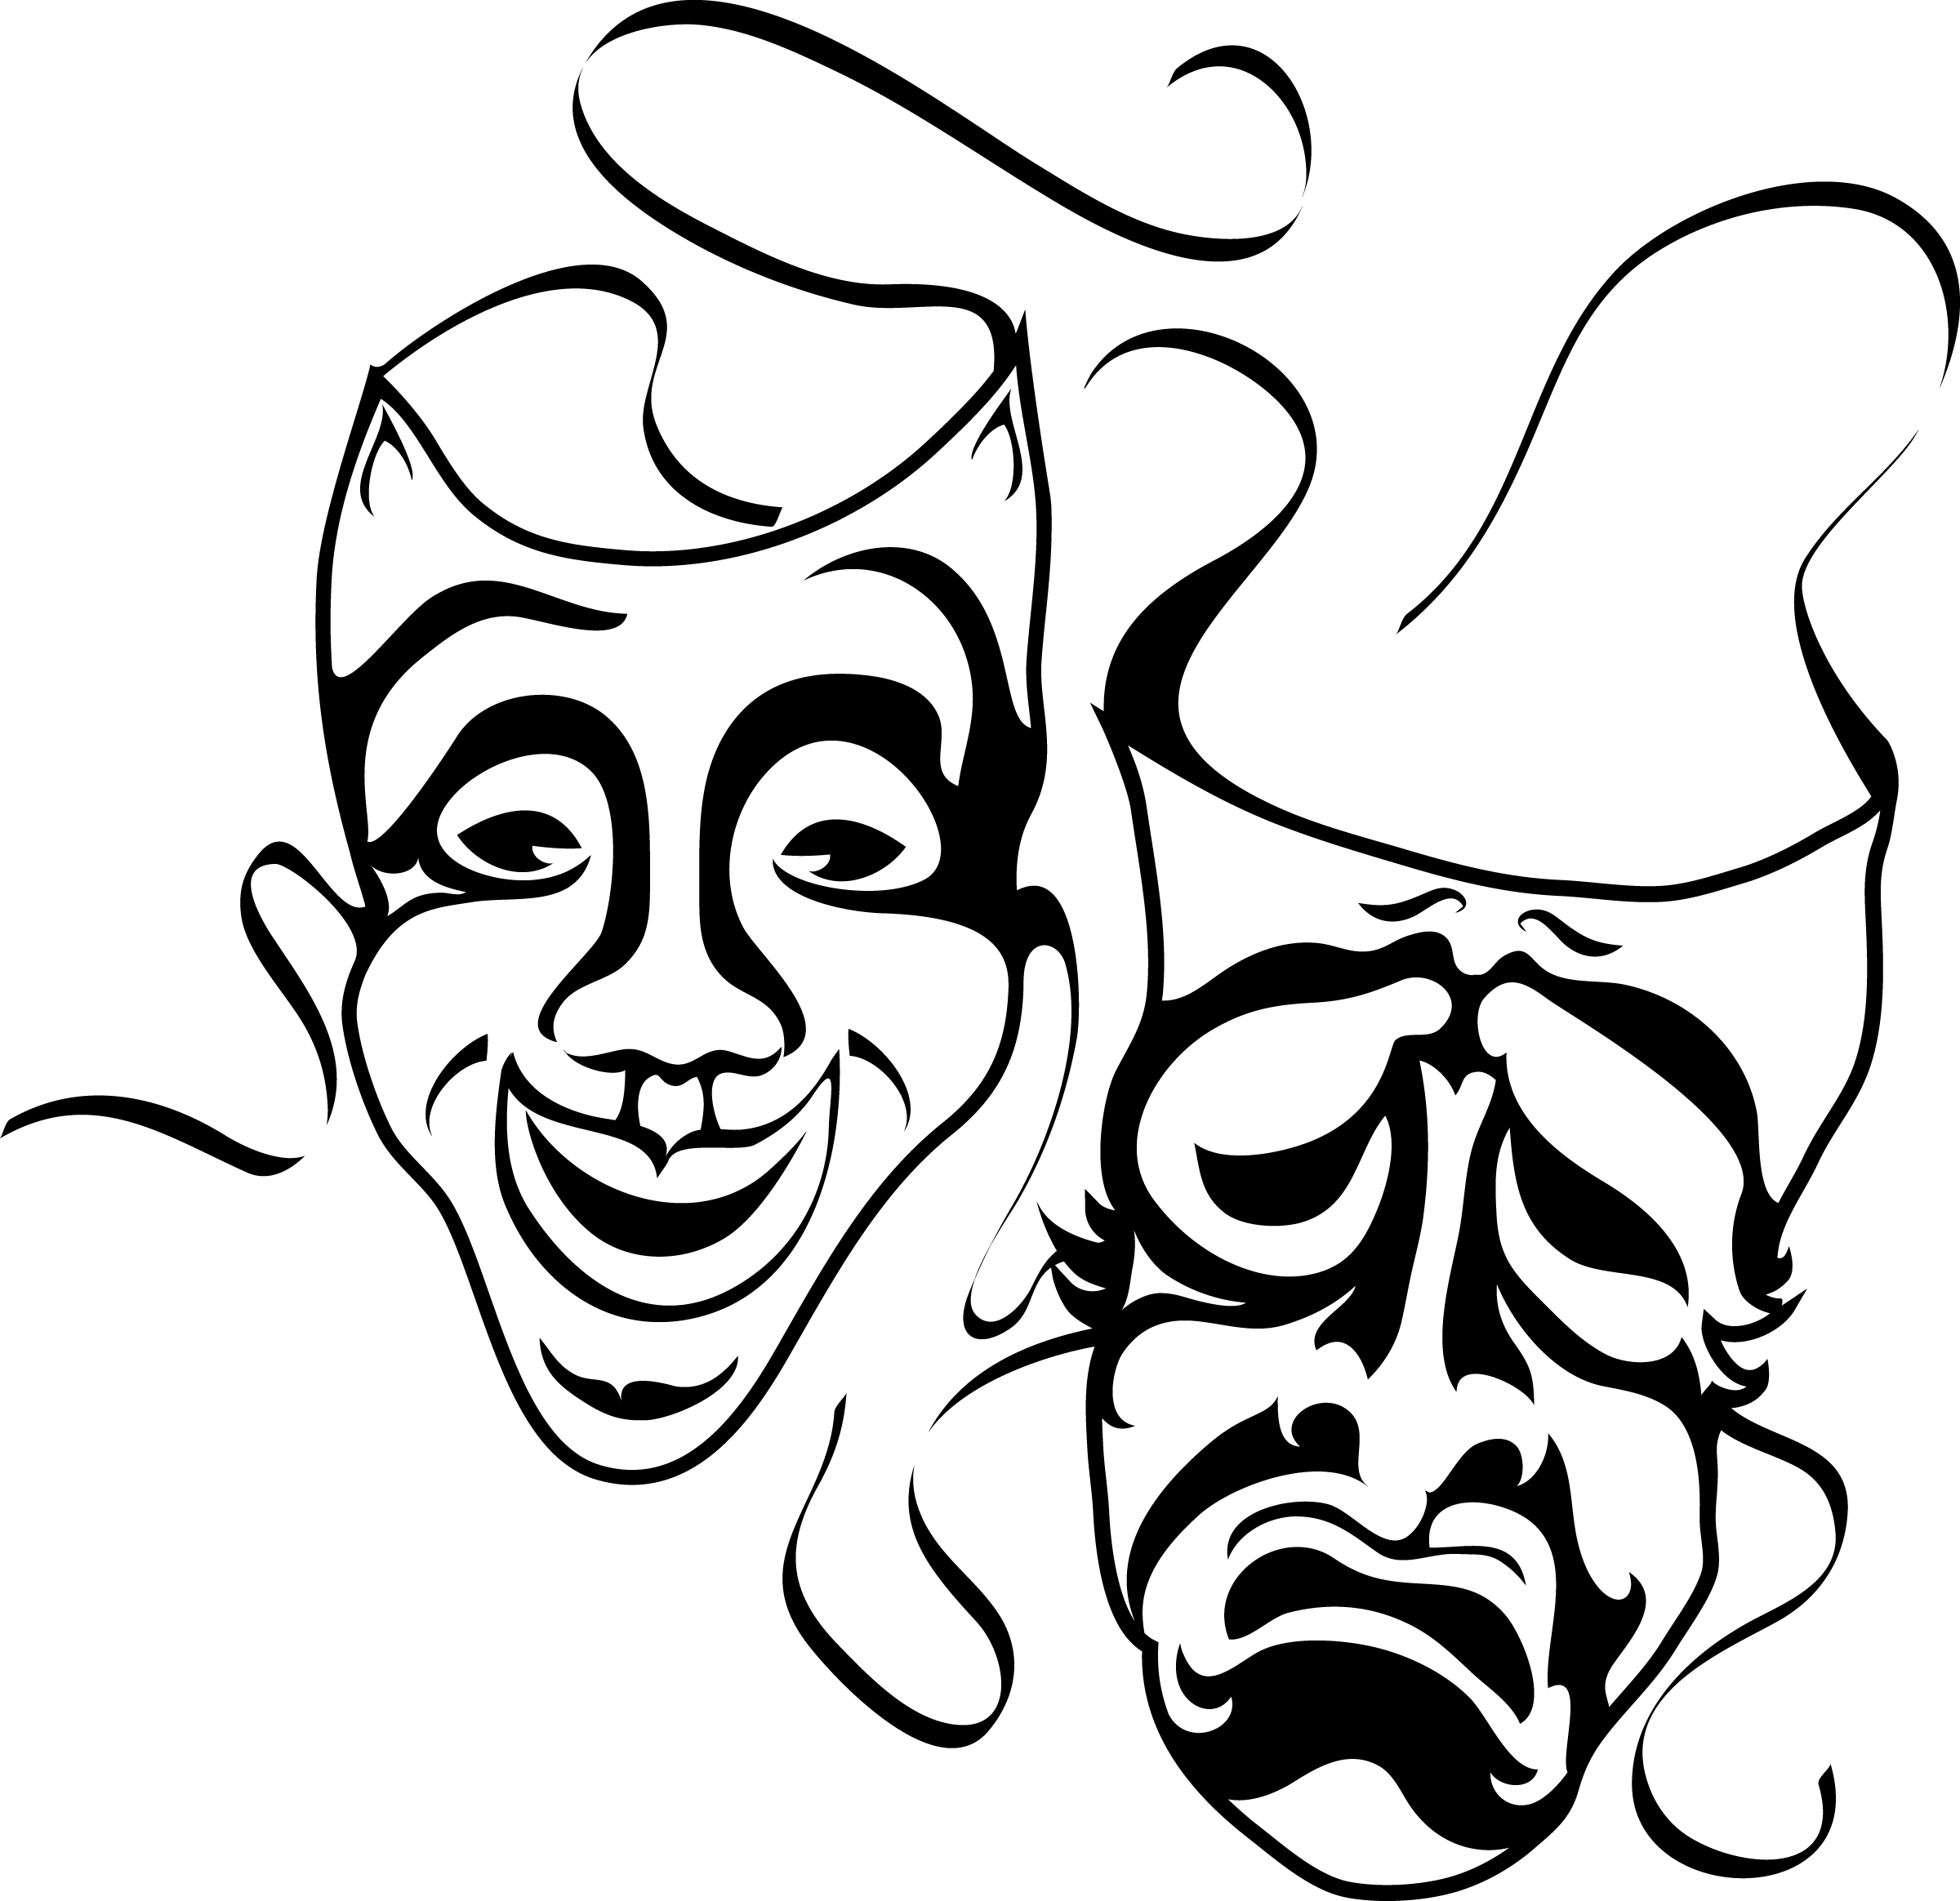 Comedy/drama Masks - Clipart library